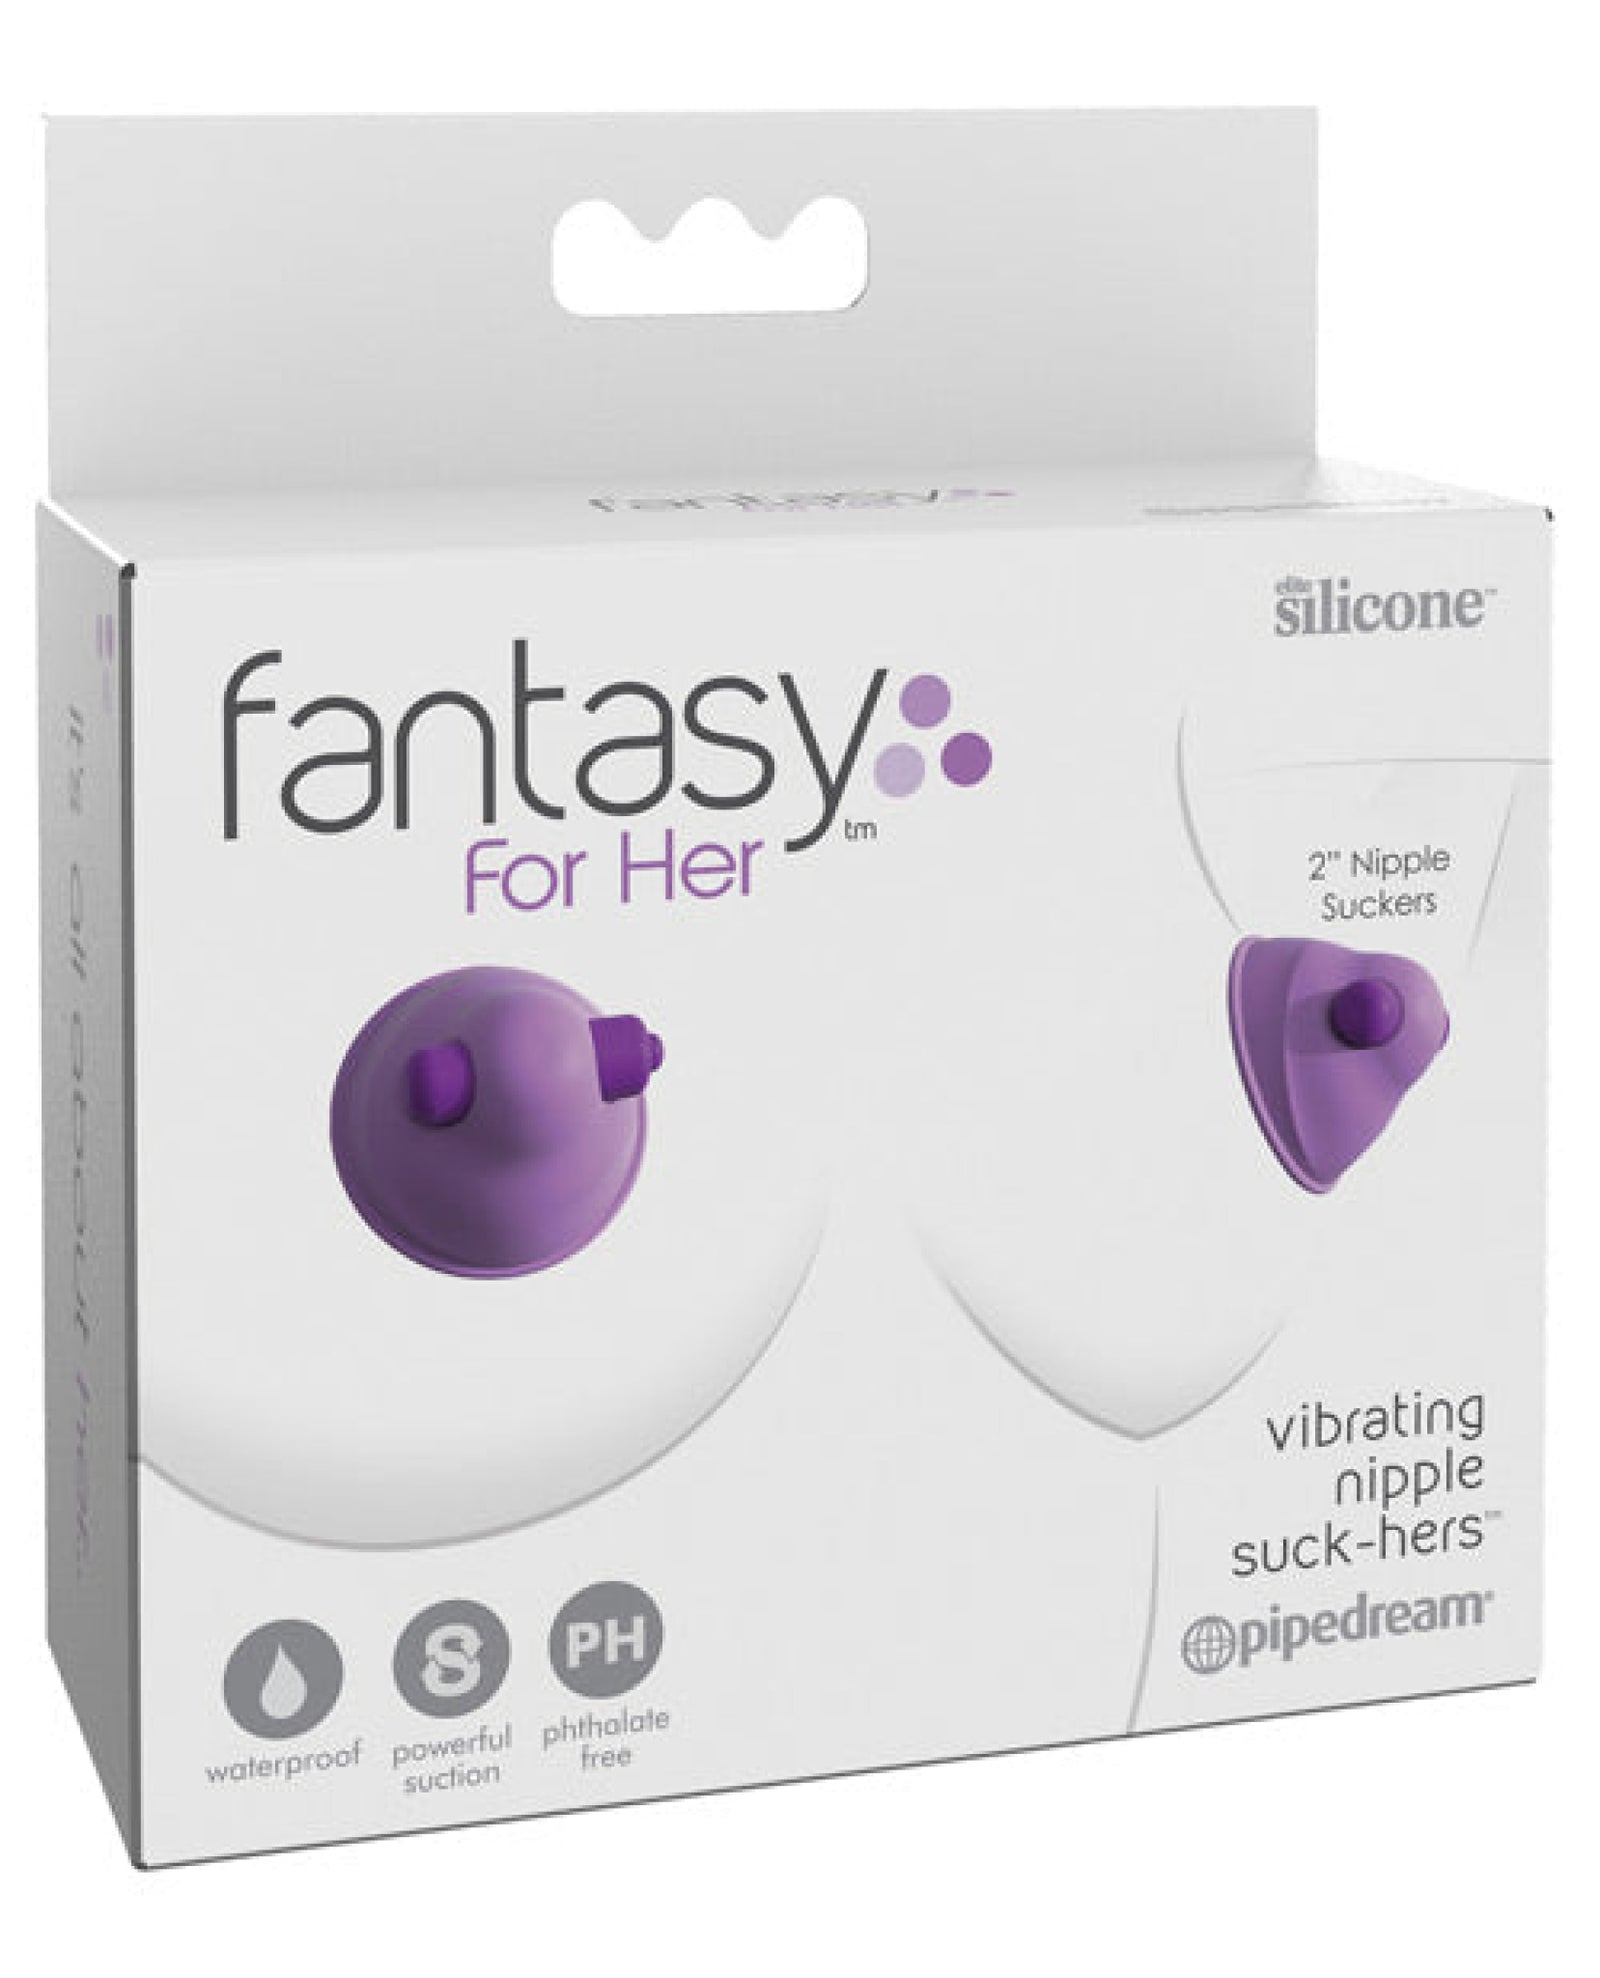 Fantasy For Her Vibrating Nipple Suck-hers Pipedream®